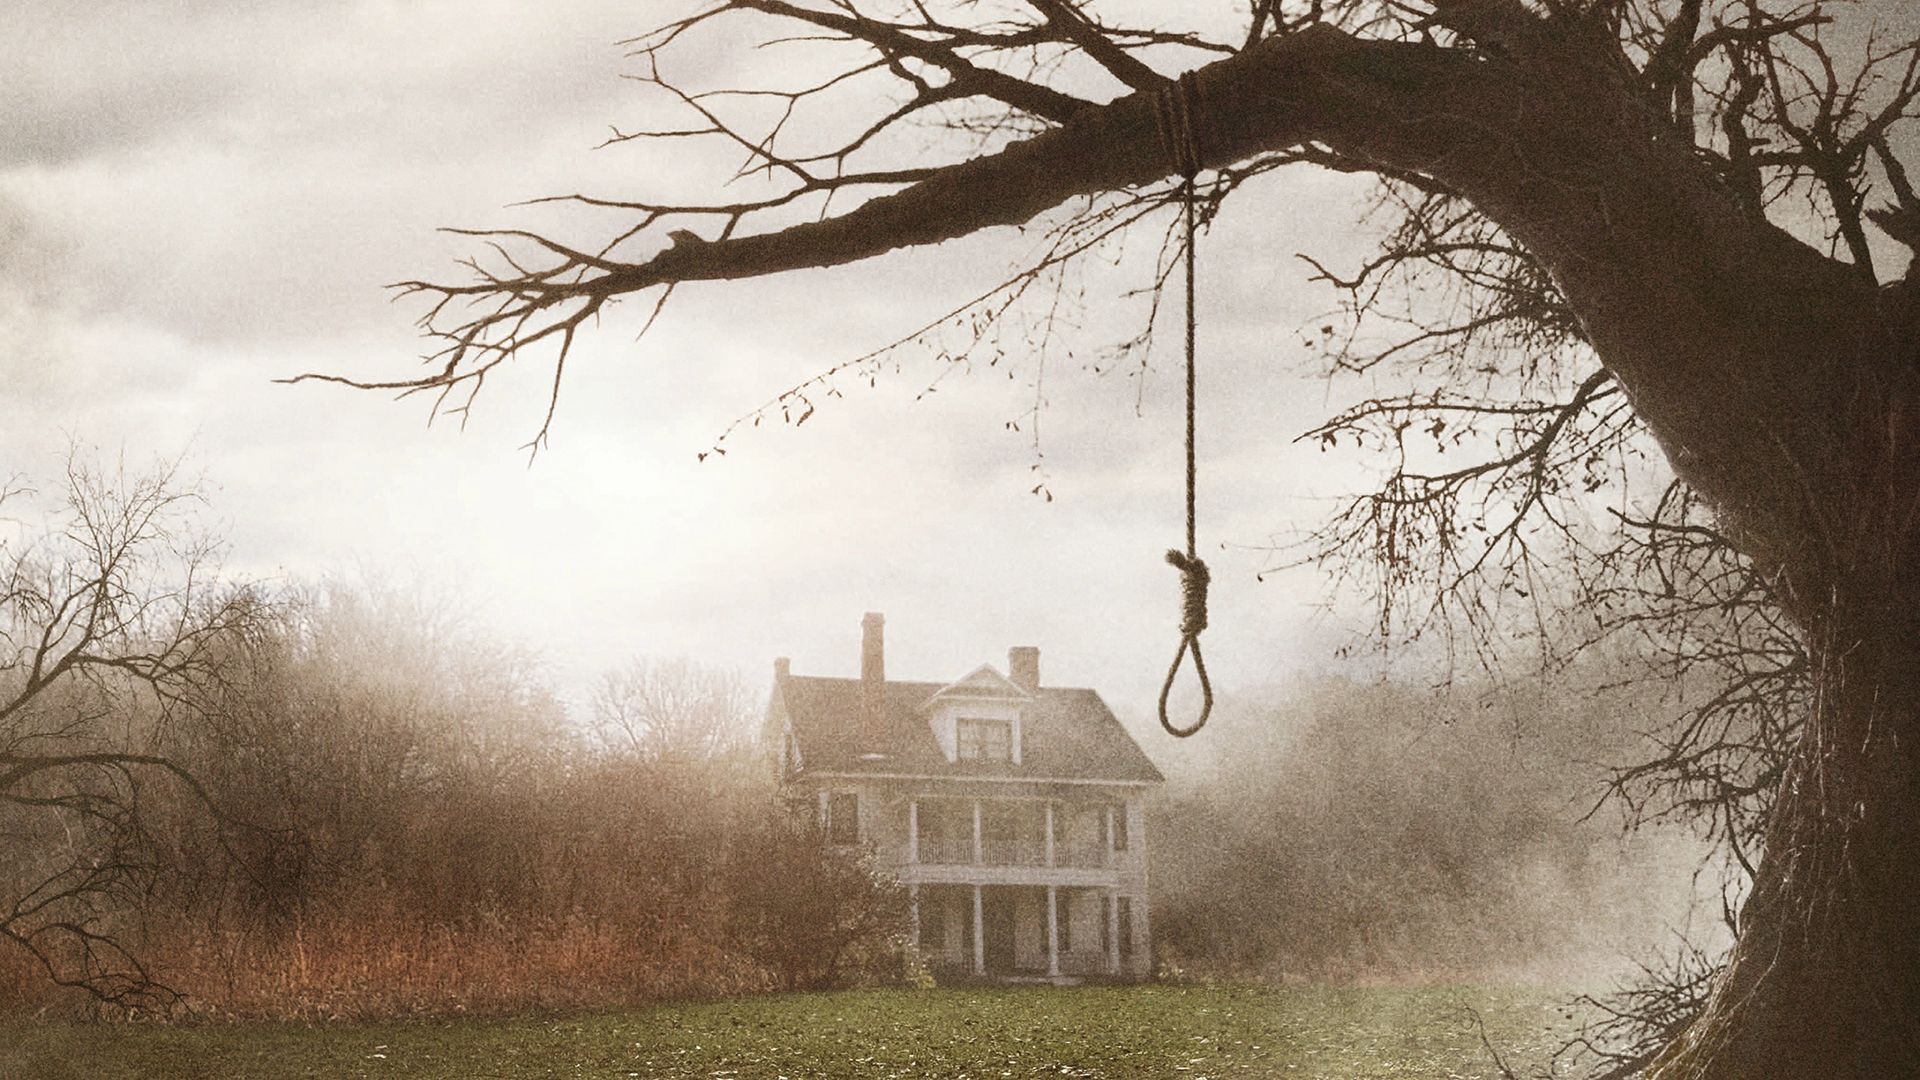 Movie The Conjuring 1920x1080